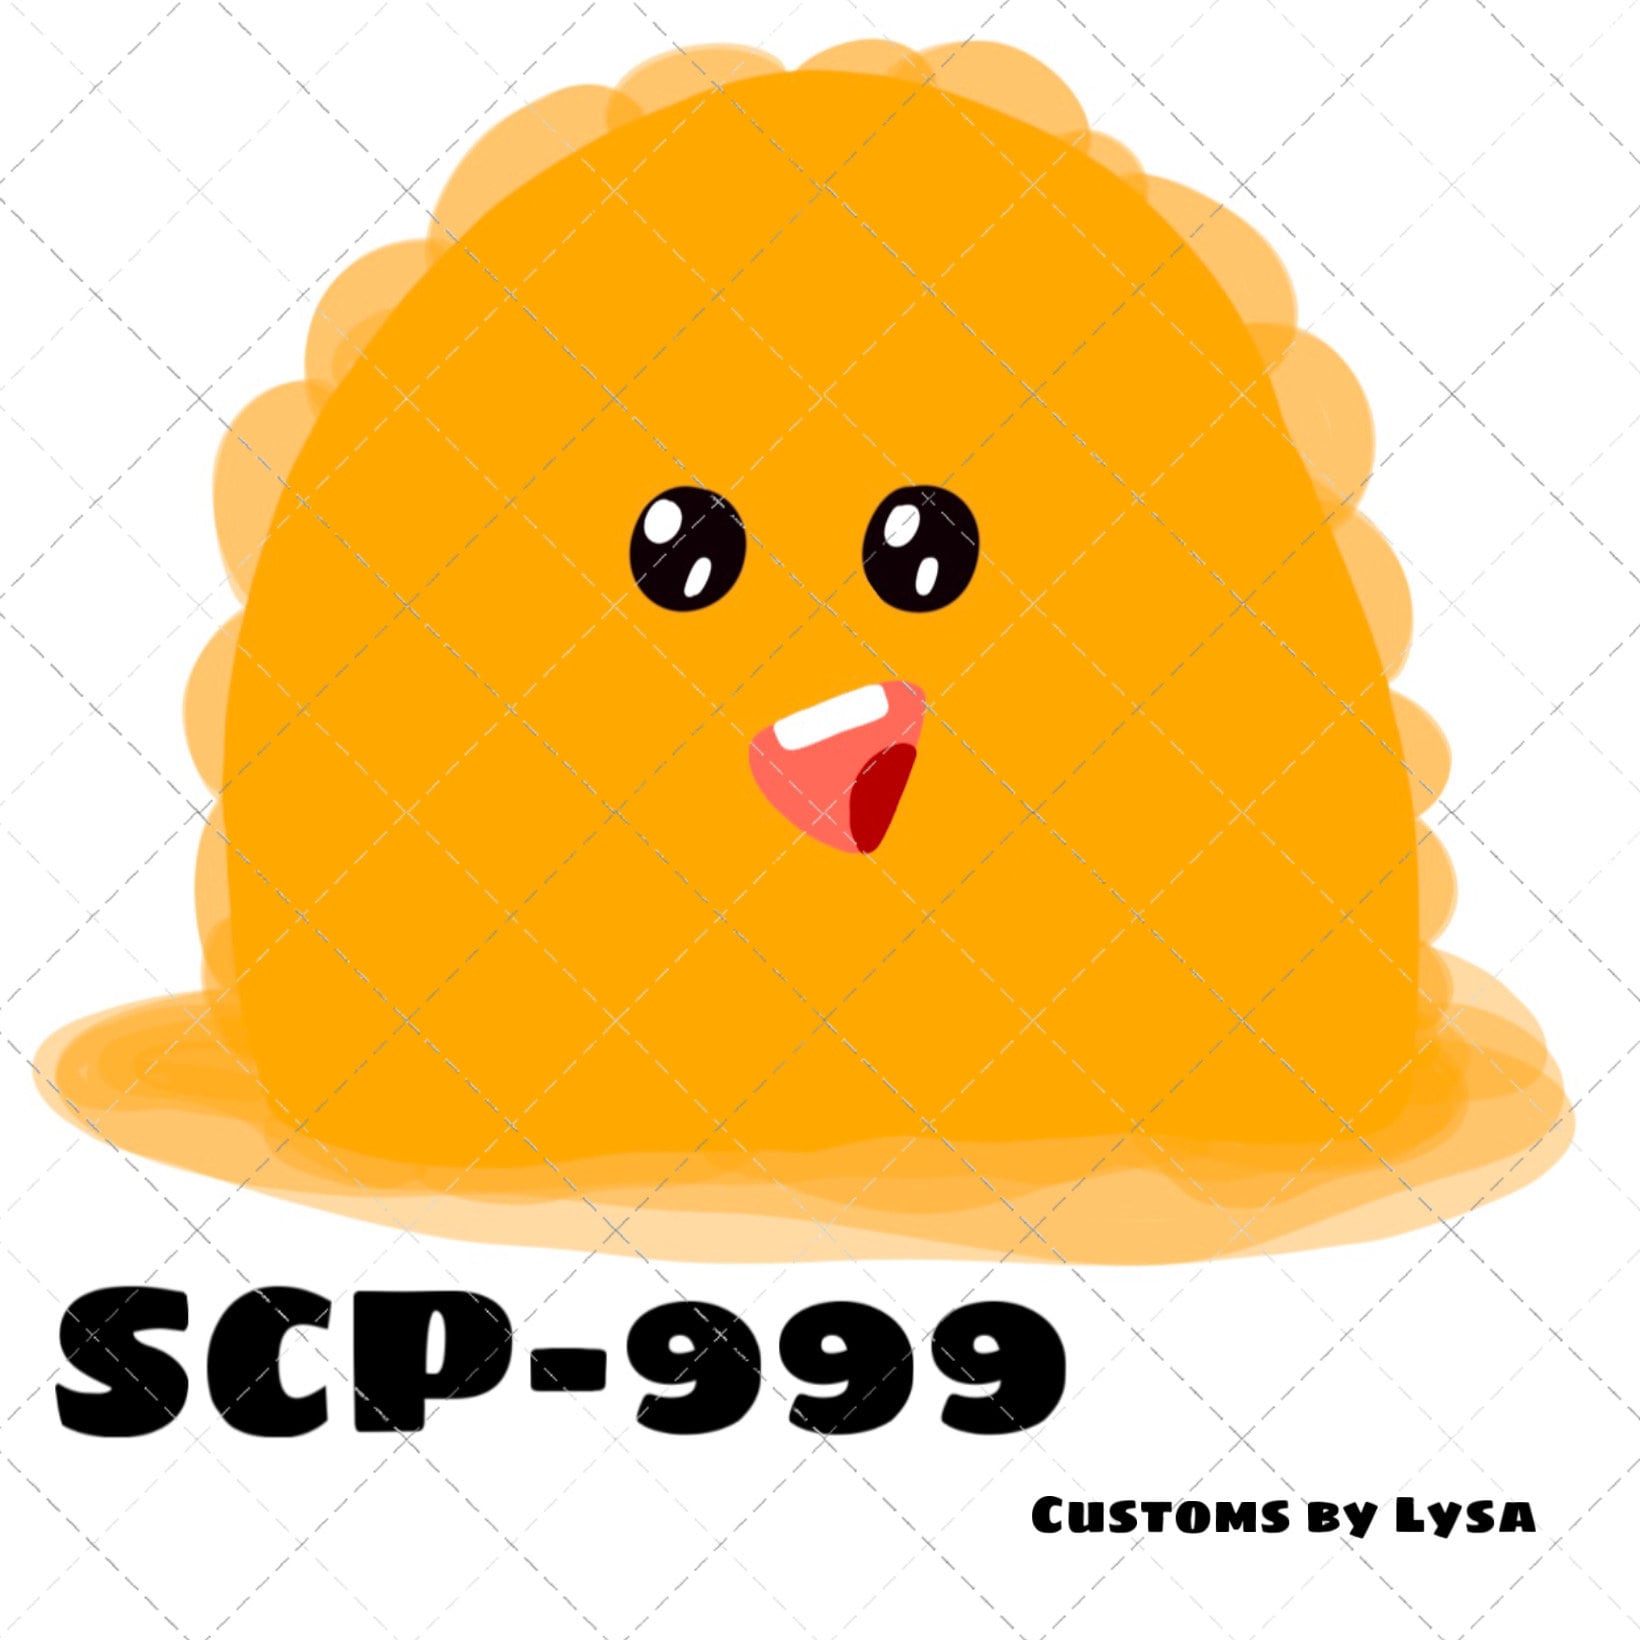 SCP-999 Art Board Print for Sale by opthedragon